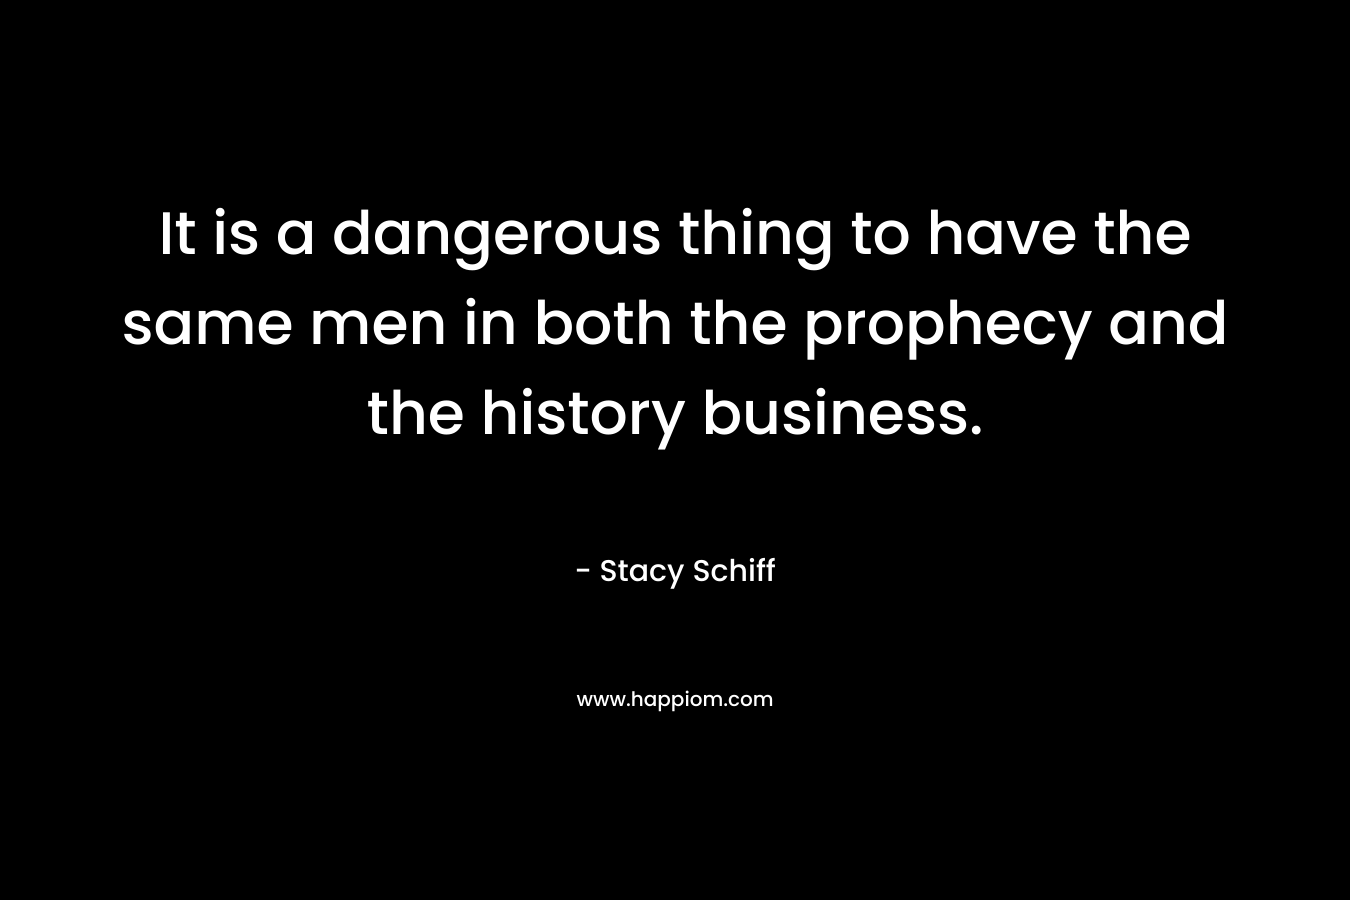 It is a dangerous thing to have the same men in both the prophecy and the history business.